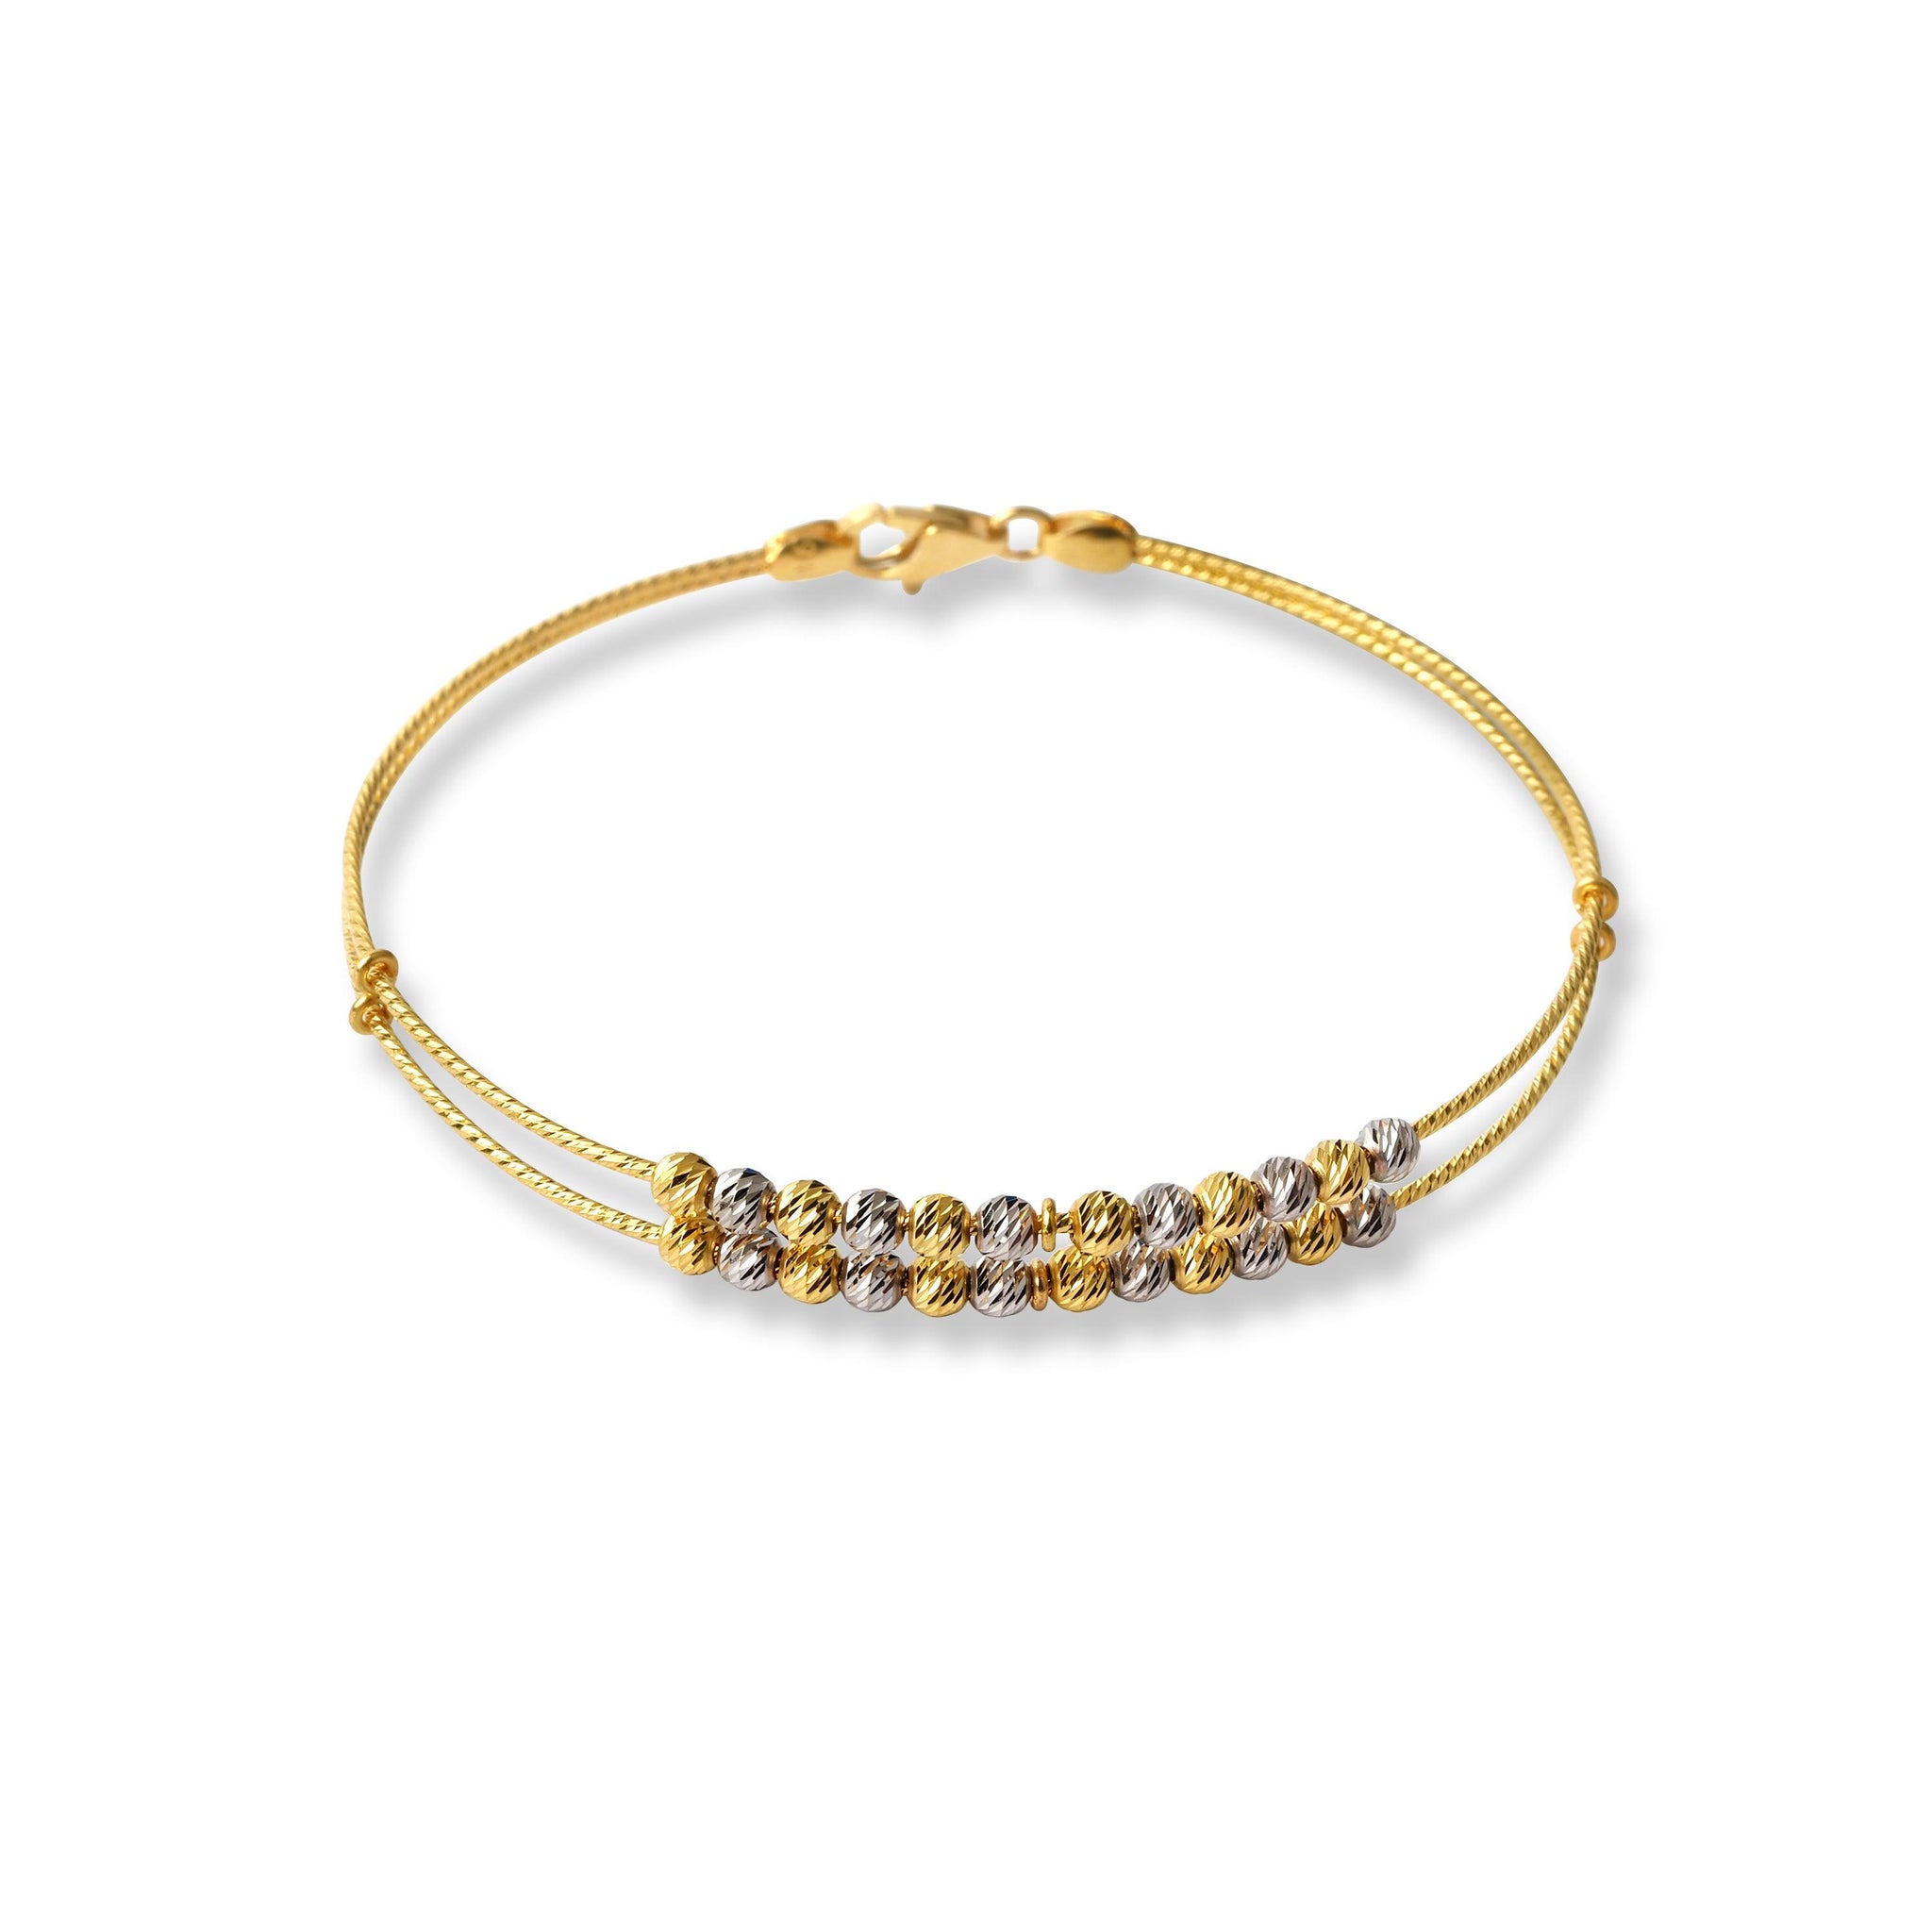 22ct Gold Rhodium Plated Beads Bangle With Rounded Trigger Clasp (7.0g) B-8443